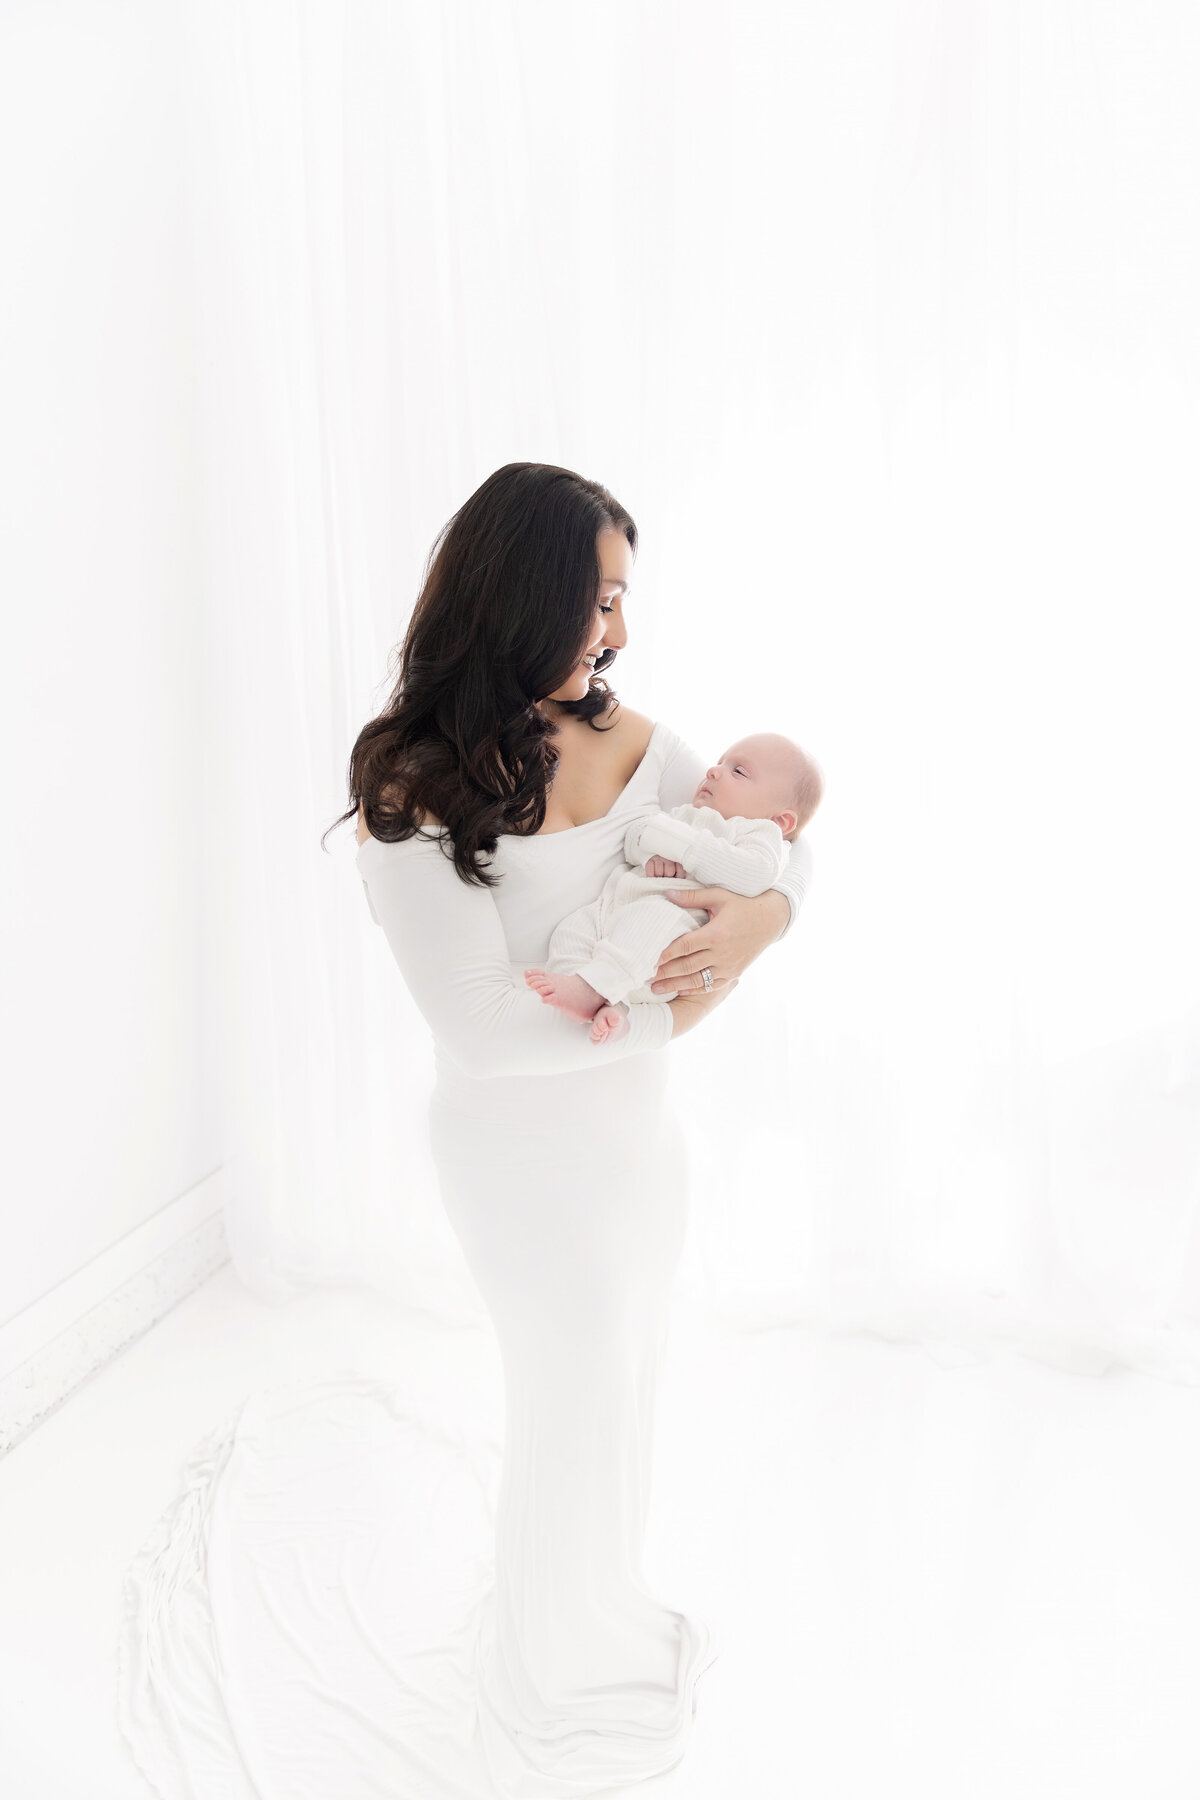 A happy new mother in a glamorous white dress cradles her newborn baby while standing in a studio